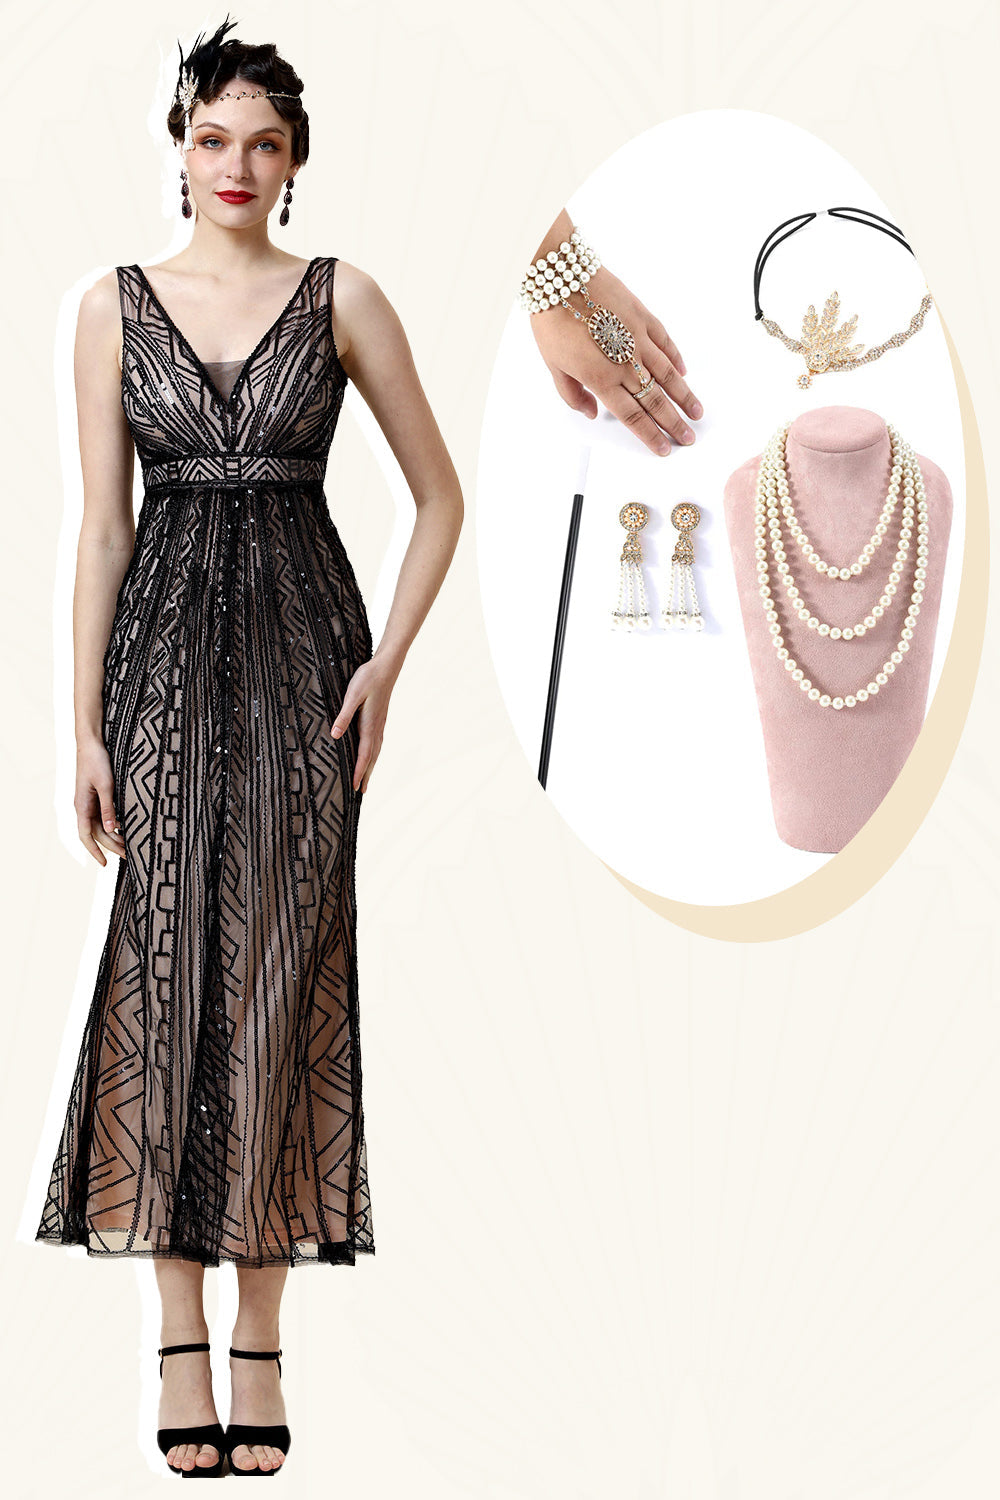 Pink Sequins Flapper Dress with 1920s Accessories Set